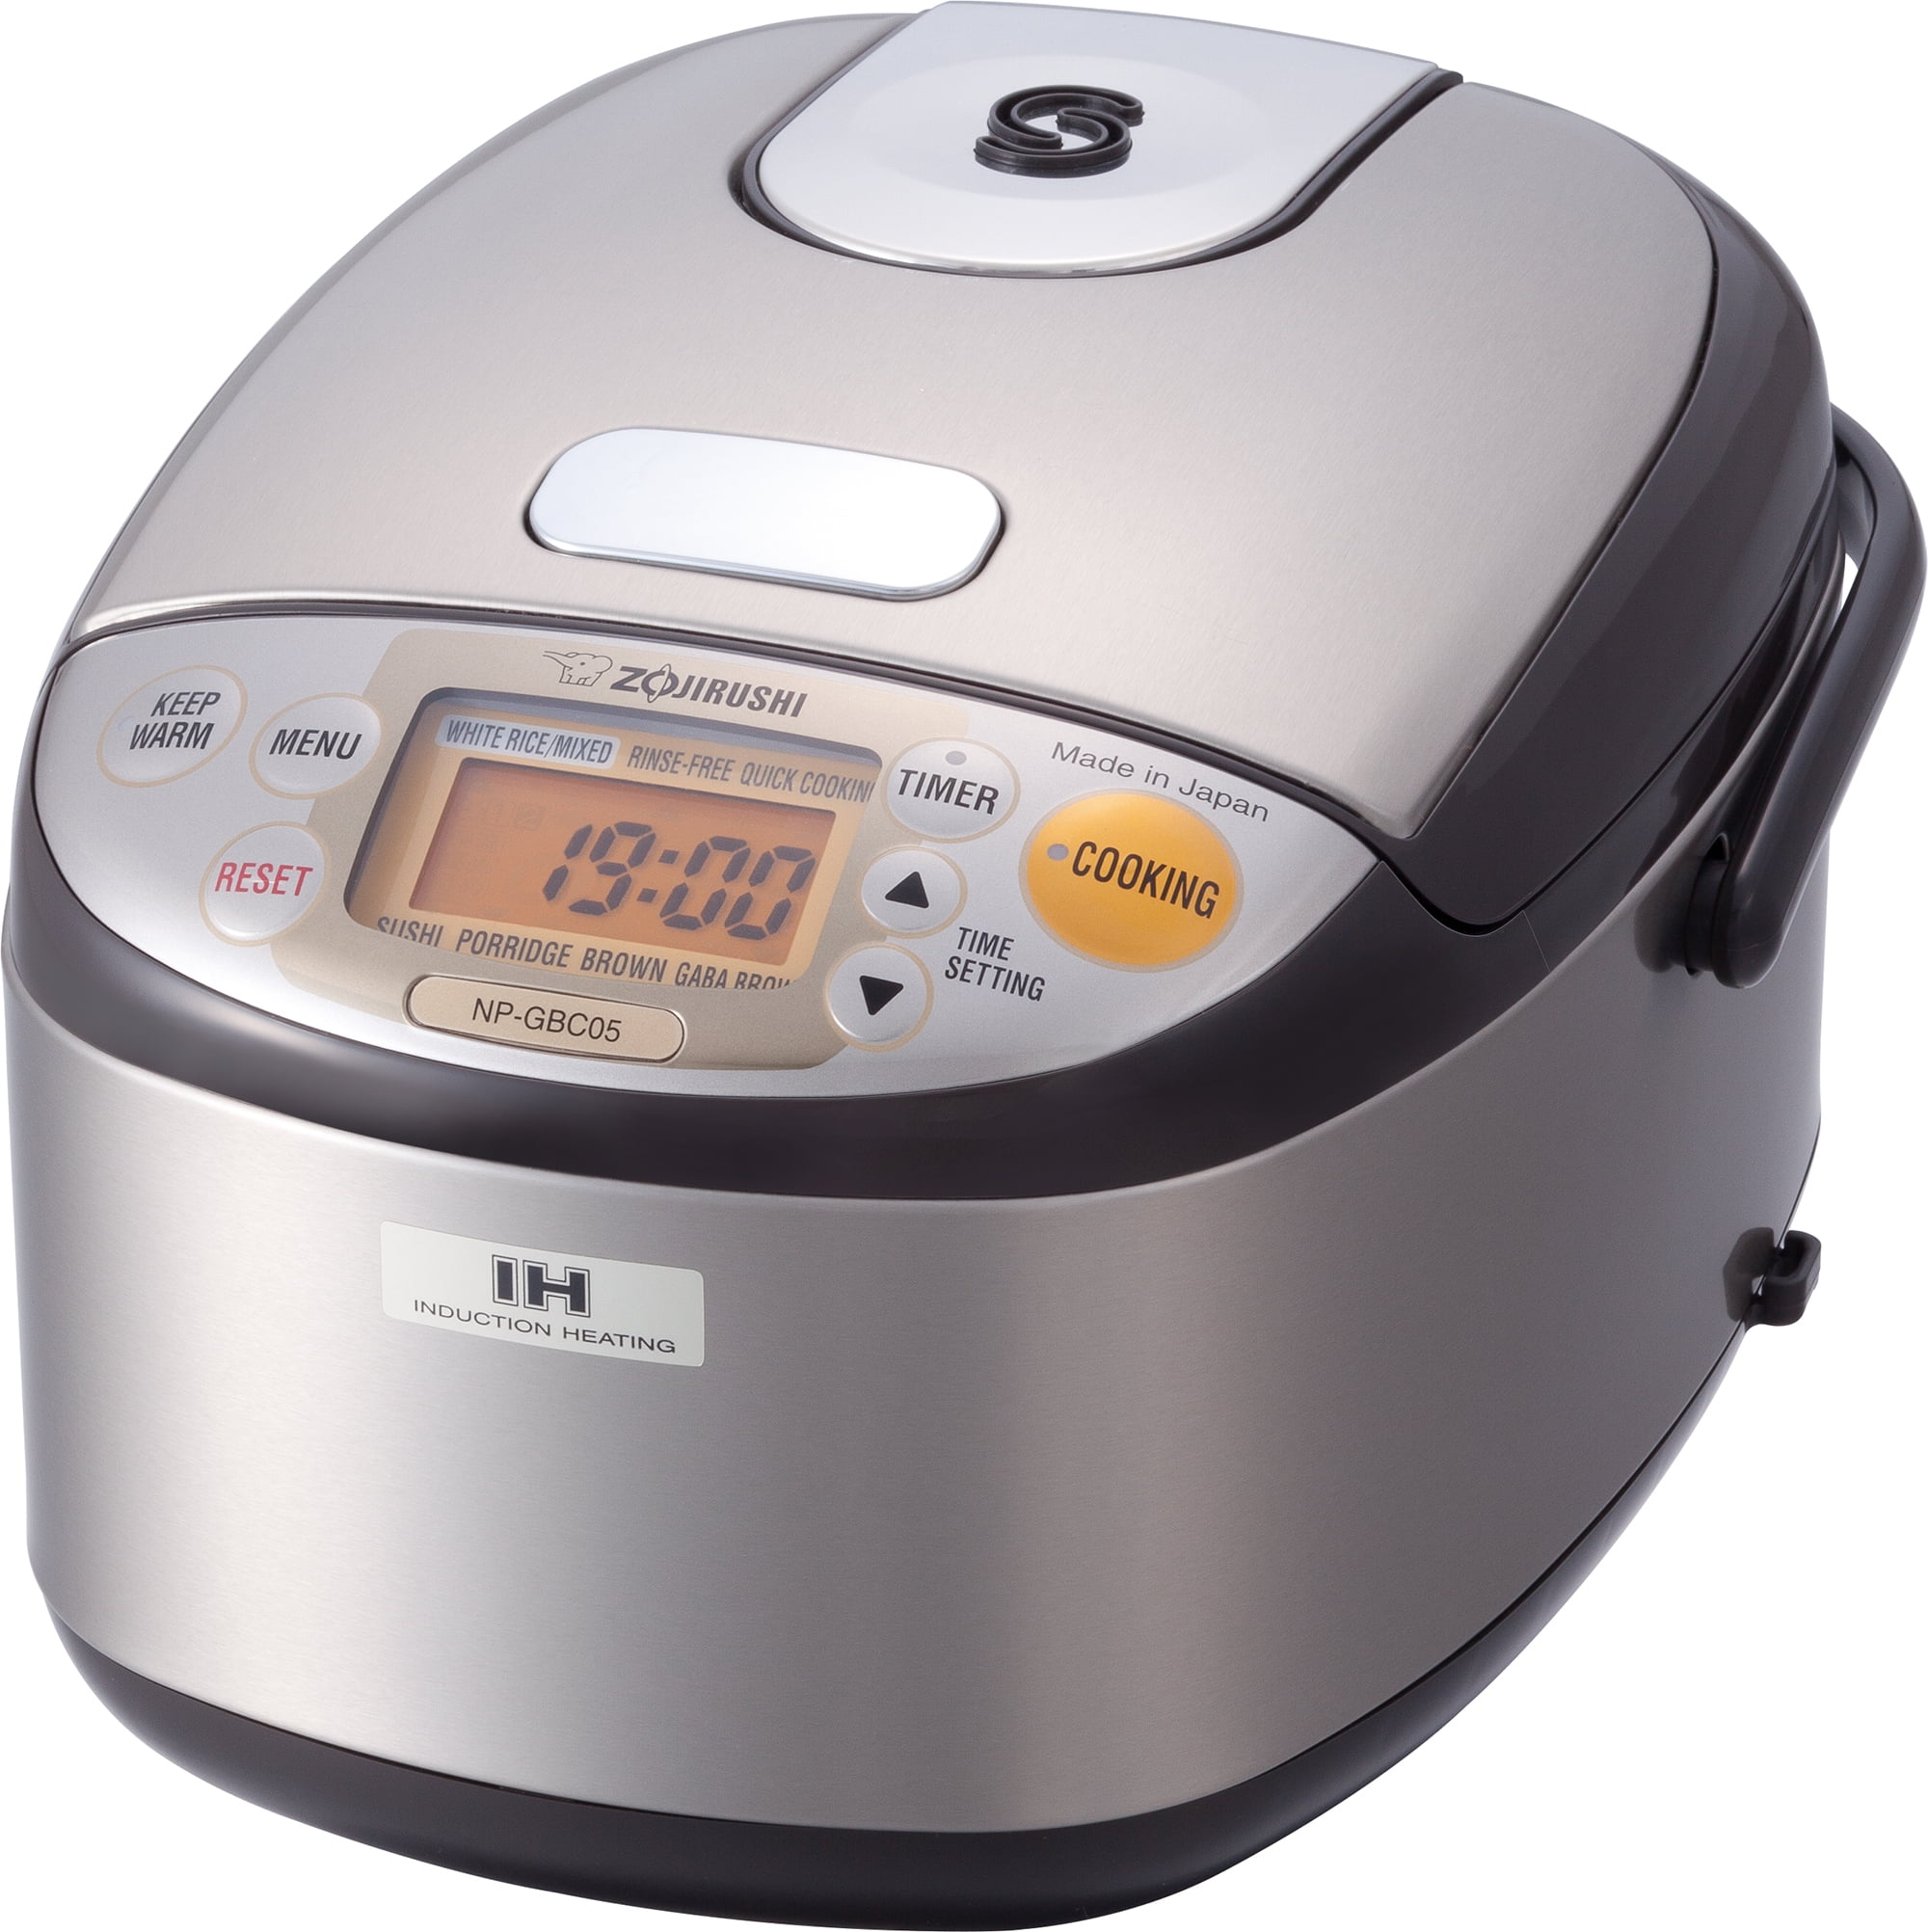 Select Stainless Rice Cooker & Warmer with Uncoated Inner Pot, 3-Cup(Uncooked)